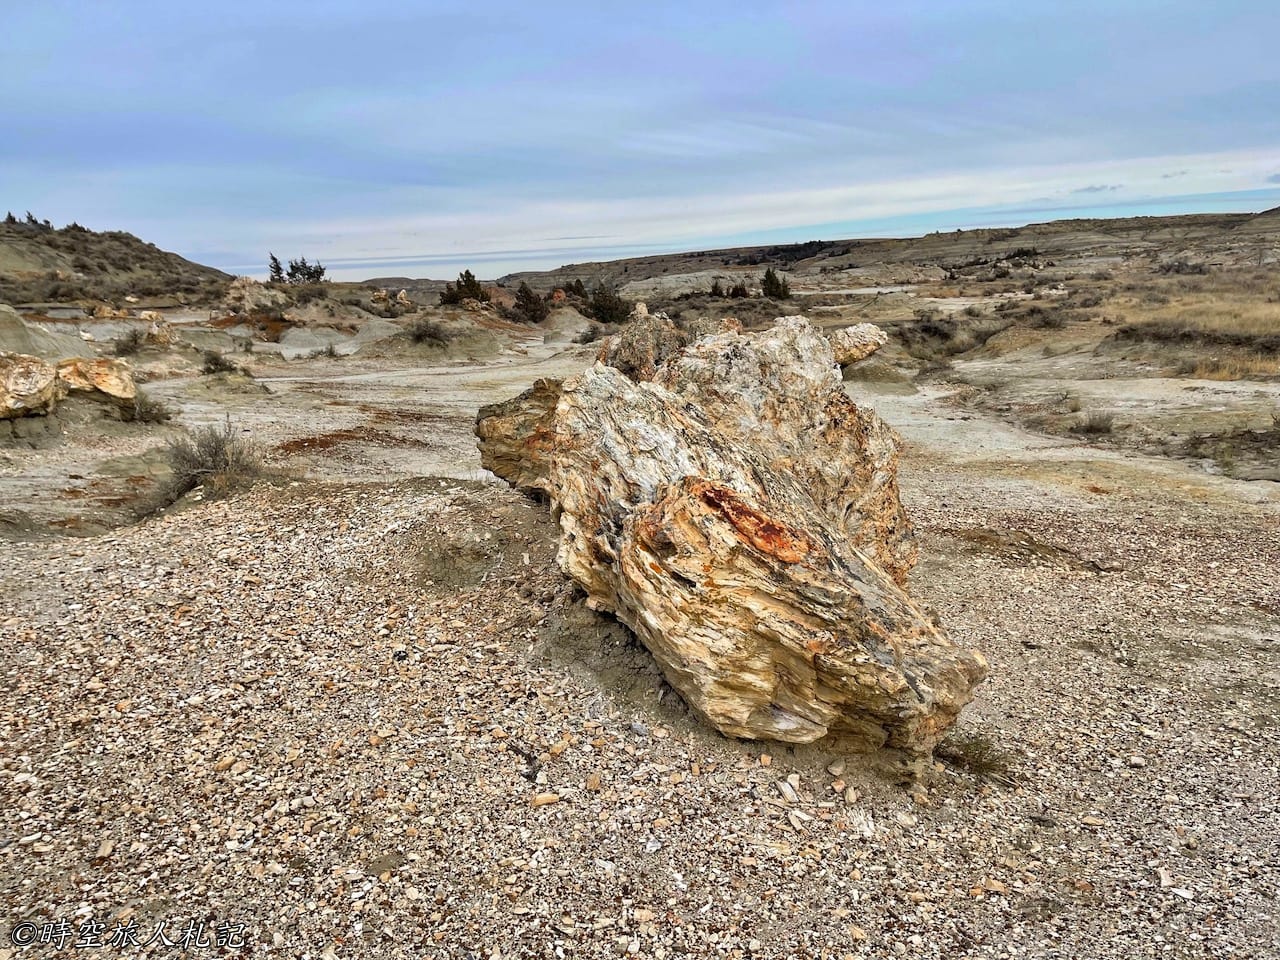 Theodore roosevelt national park,Petrified forest,羅斯福國家公園,石化林 14